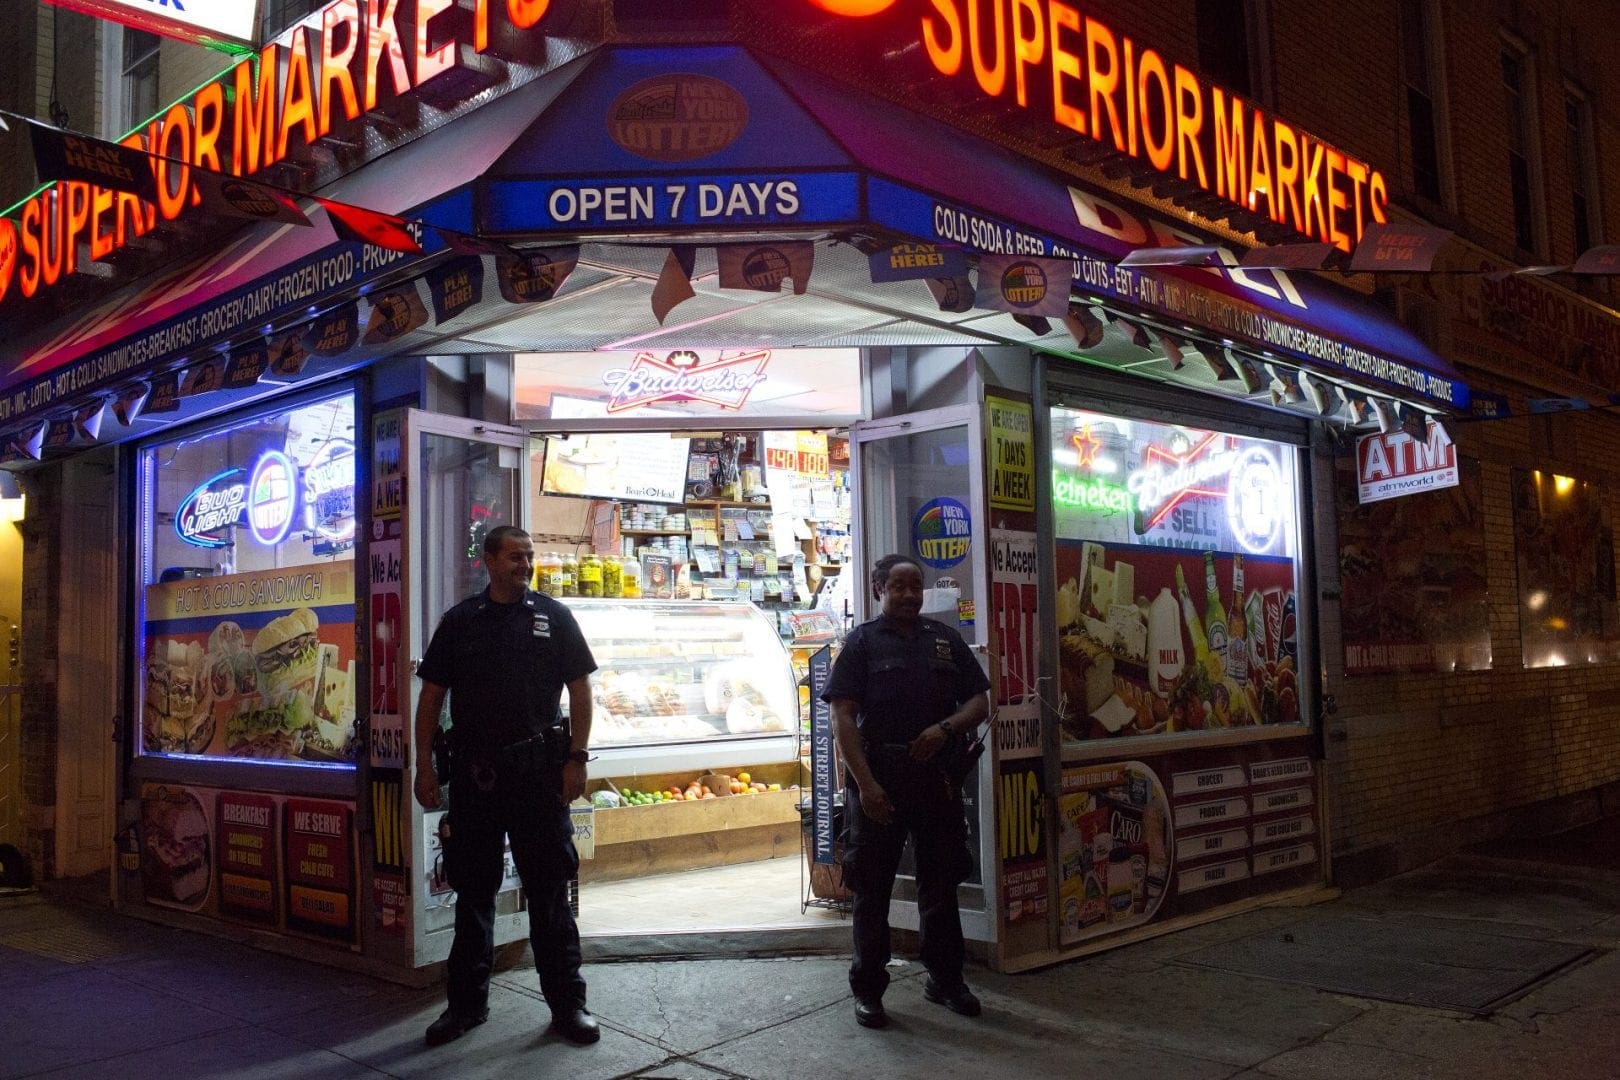 Police officers stand in front of deli at night